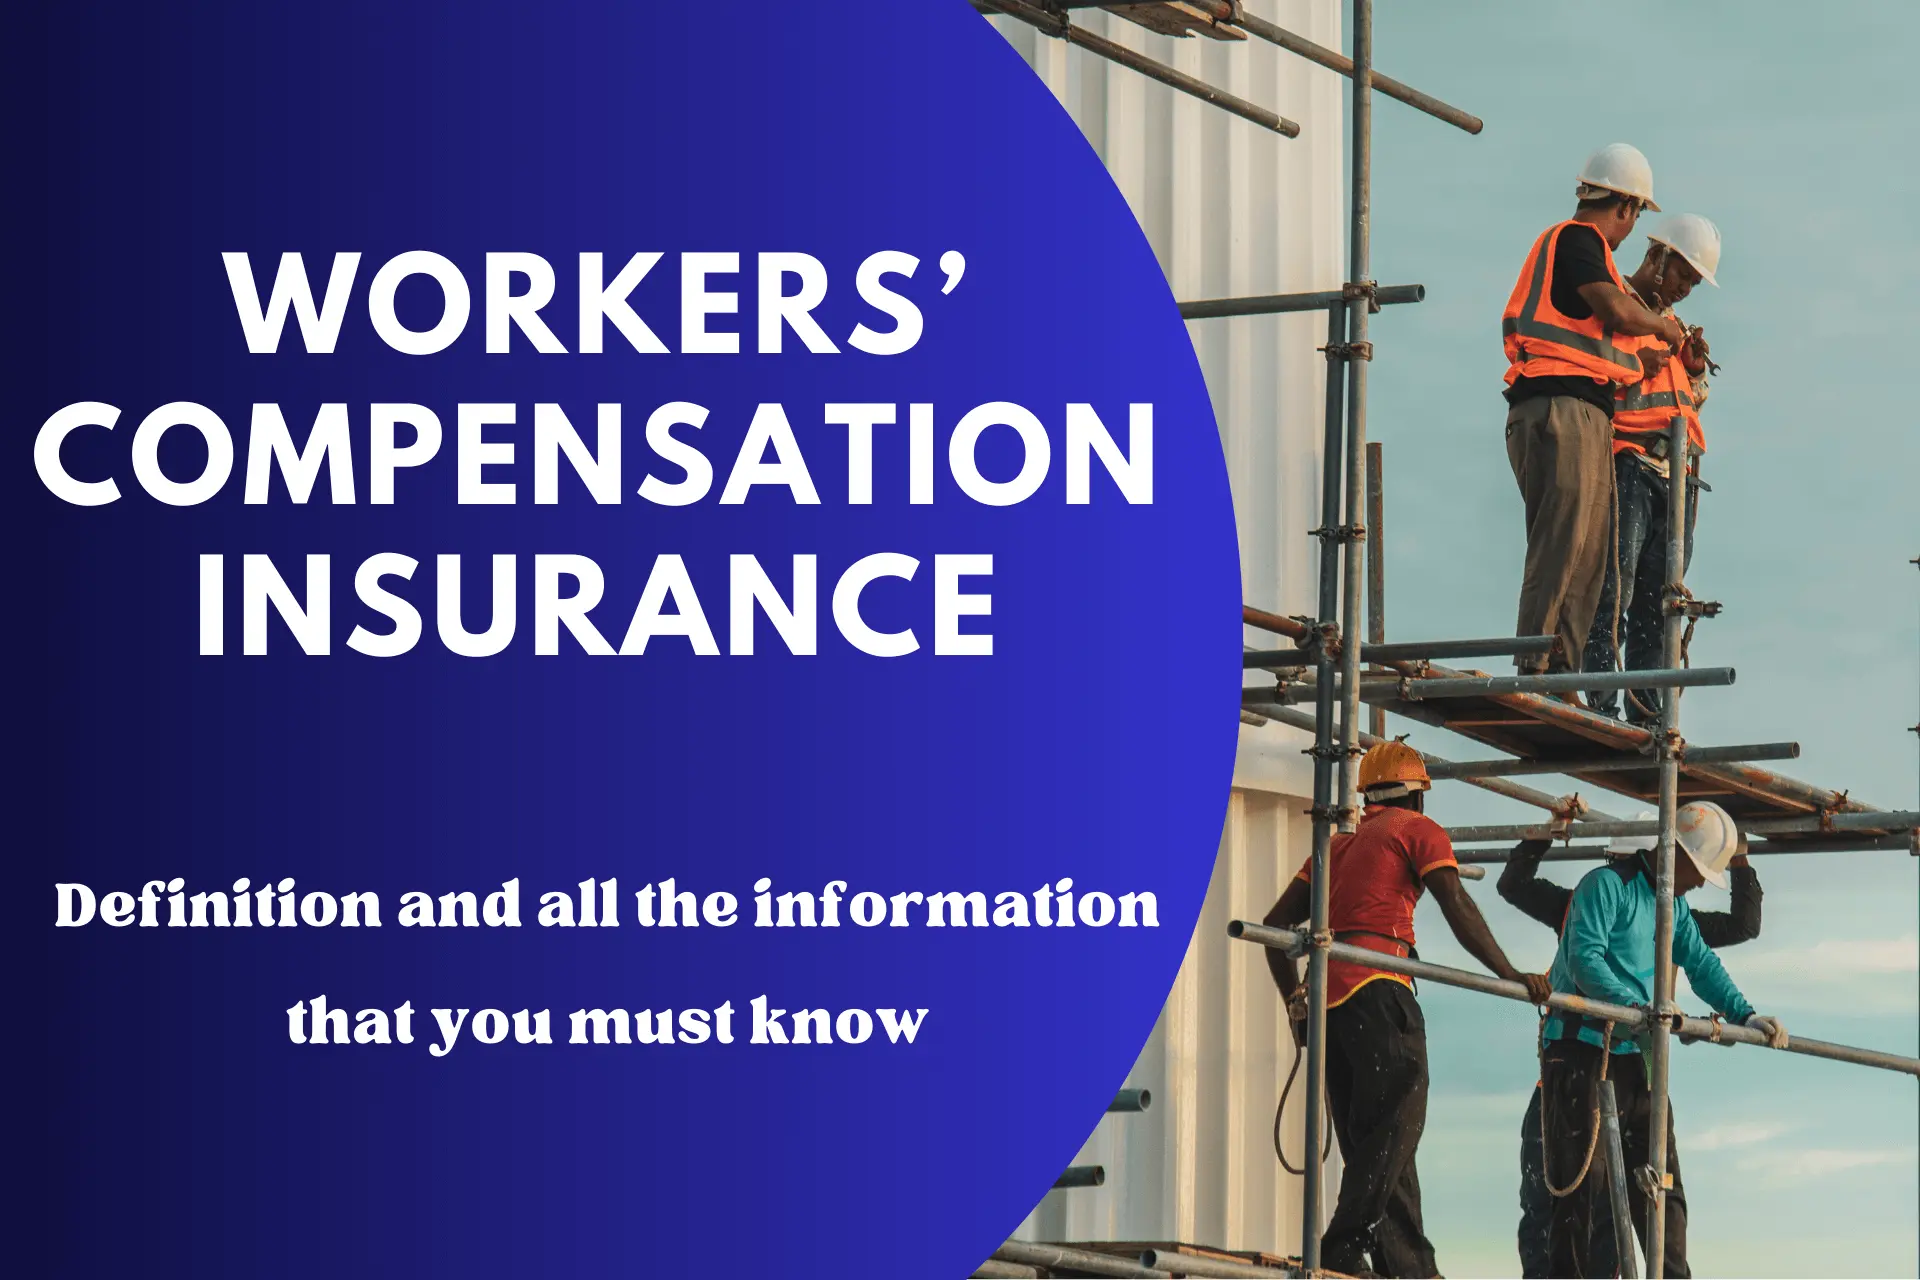 WORKERS’ COMPENSATION INSURANCE definition